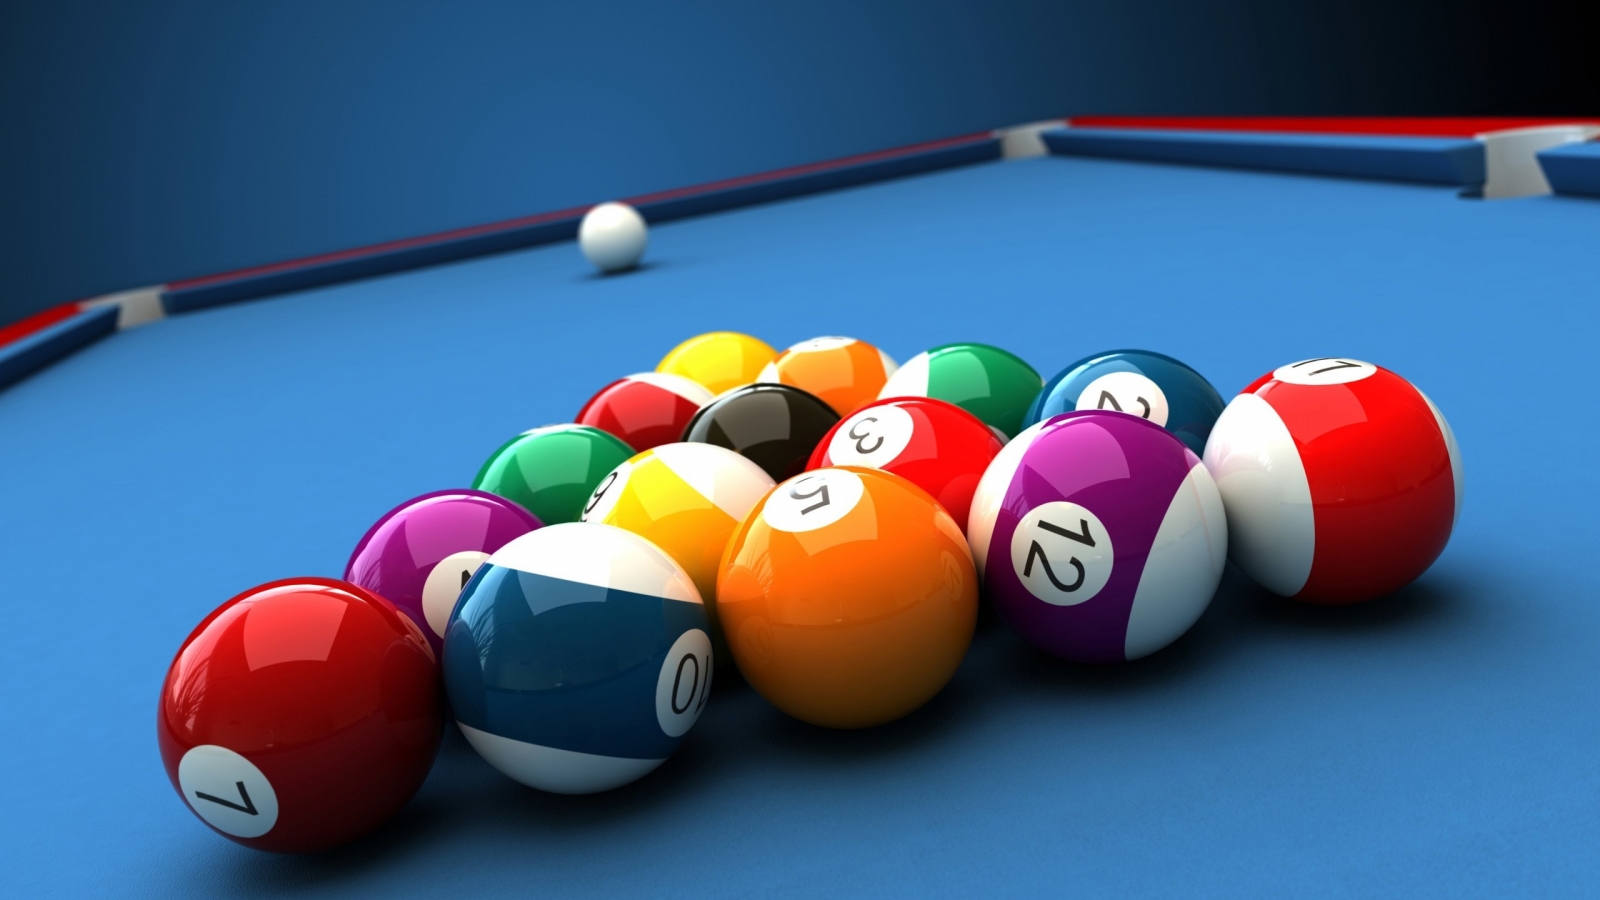 Billiards Table and Balls for 1600 x 900 HDTV resolution